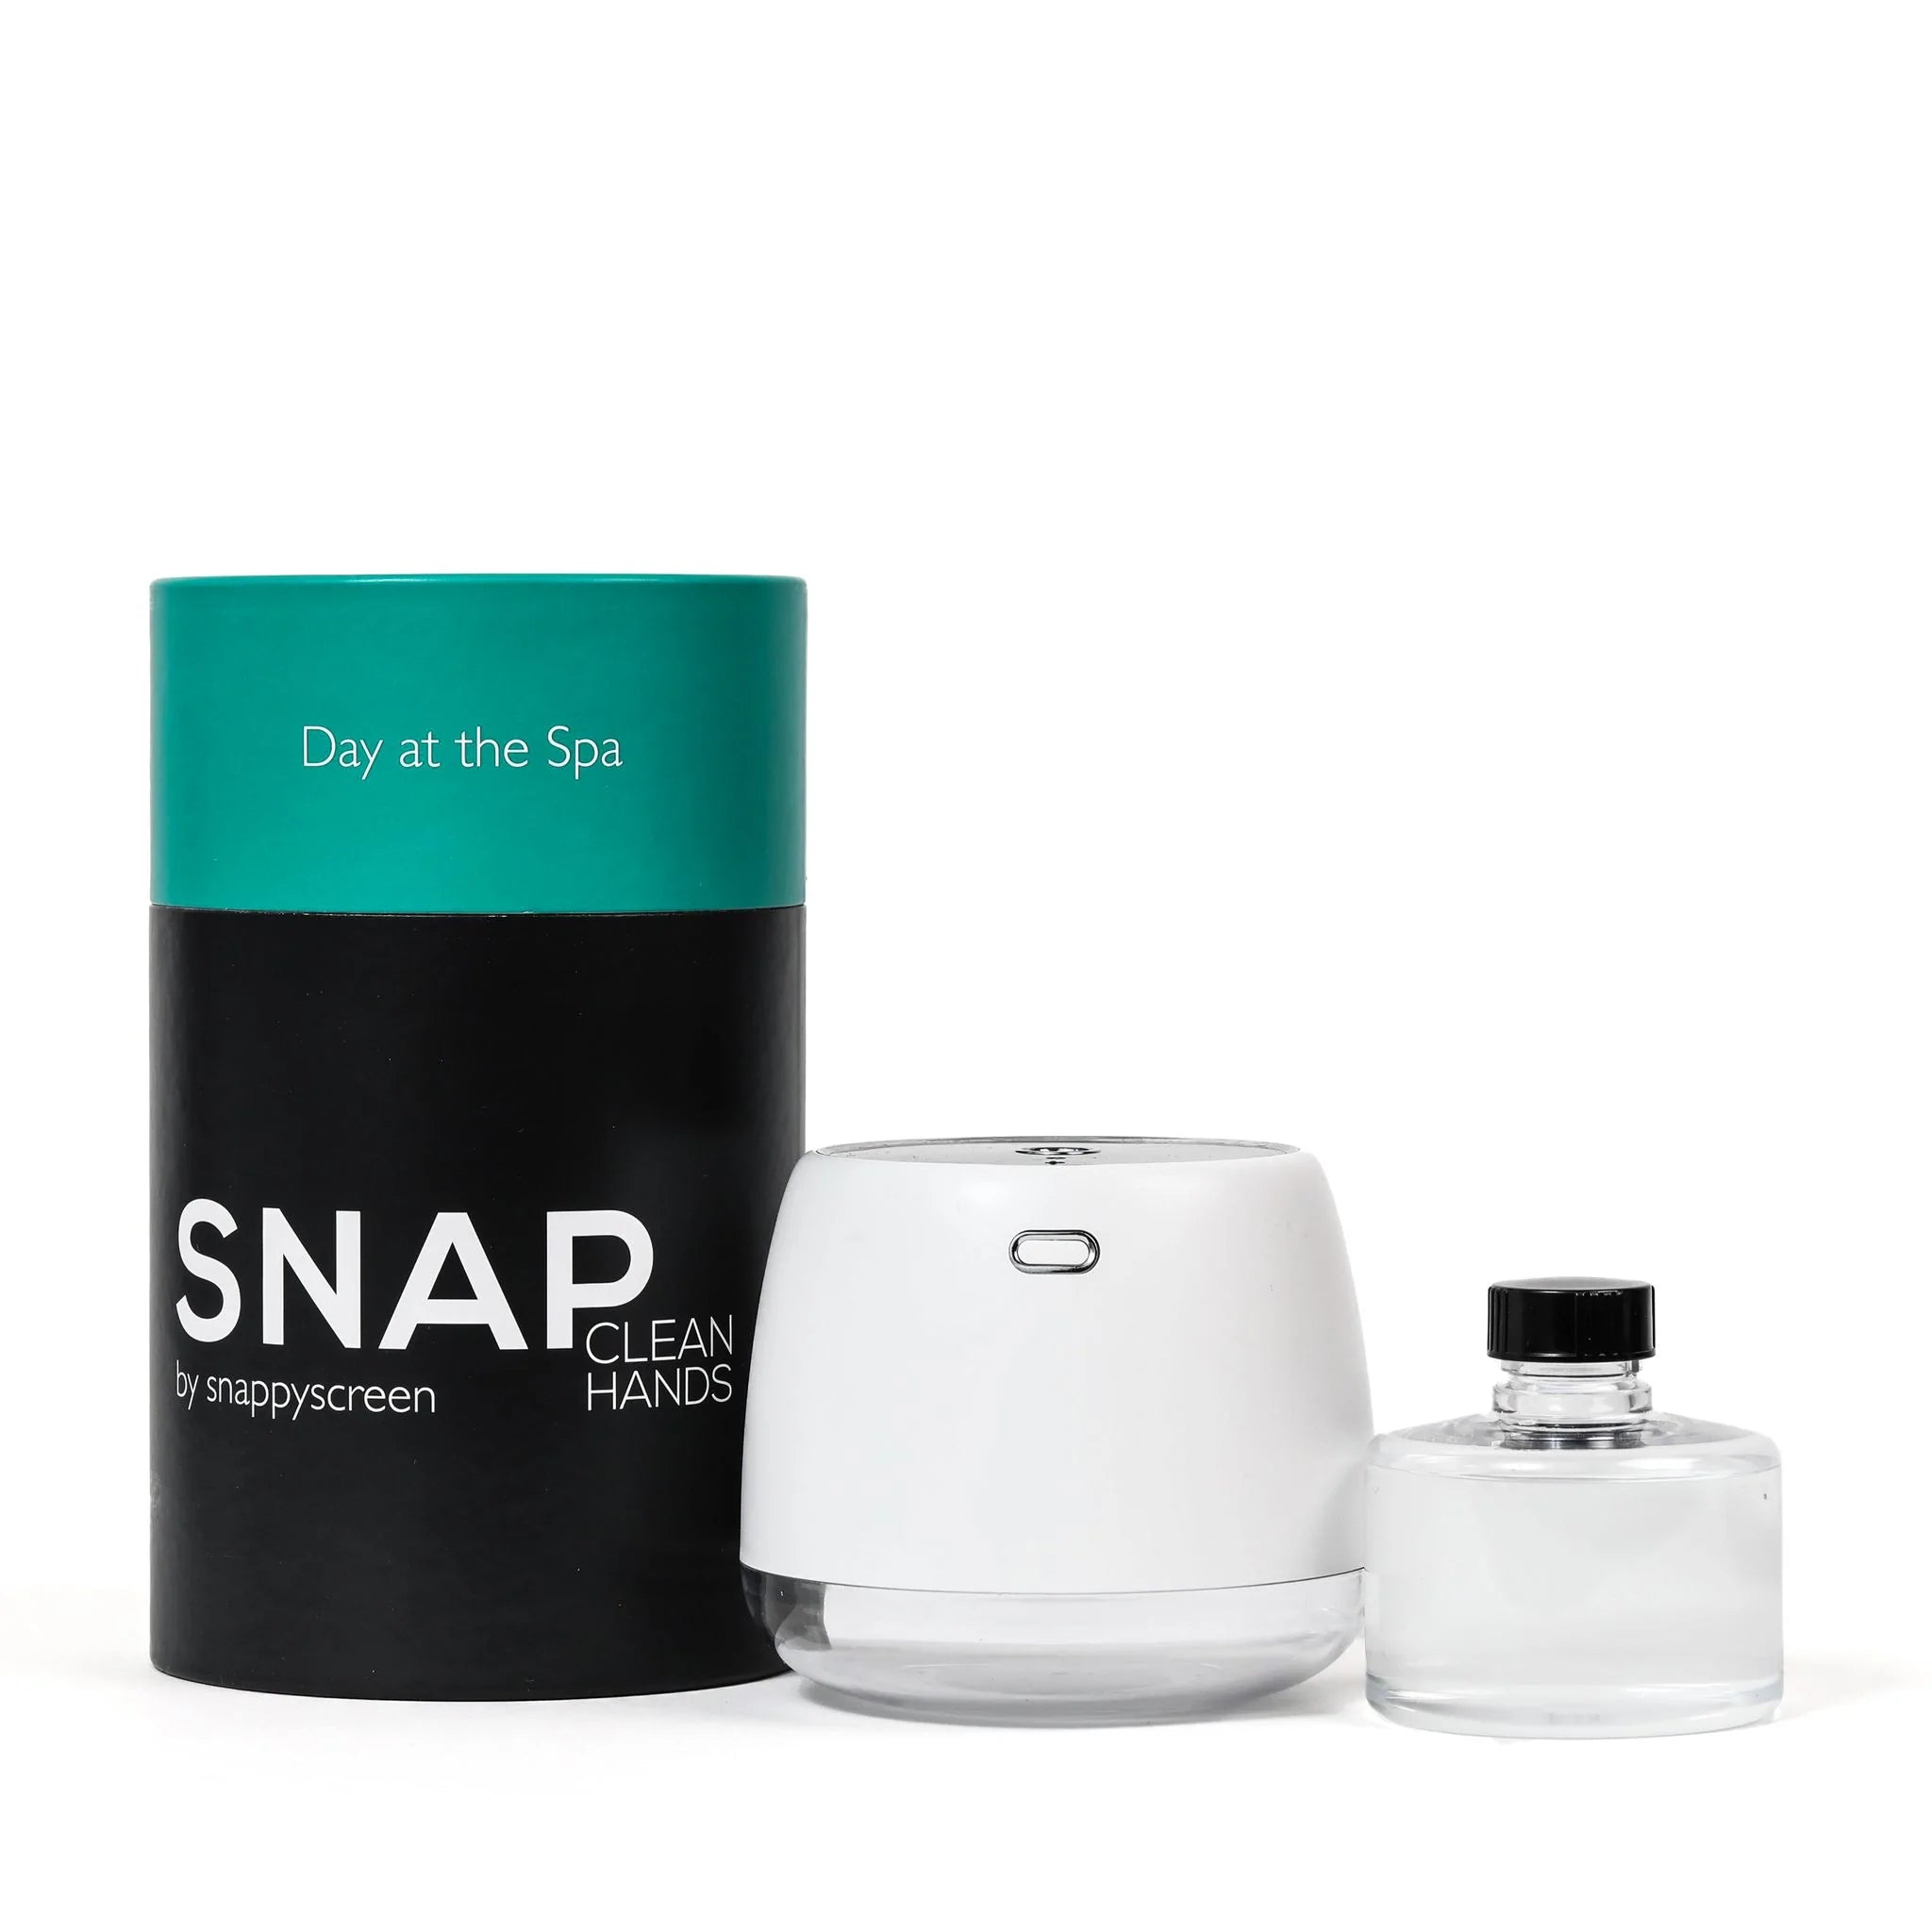 SNAP Touchless Sanitizer